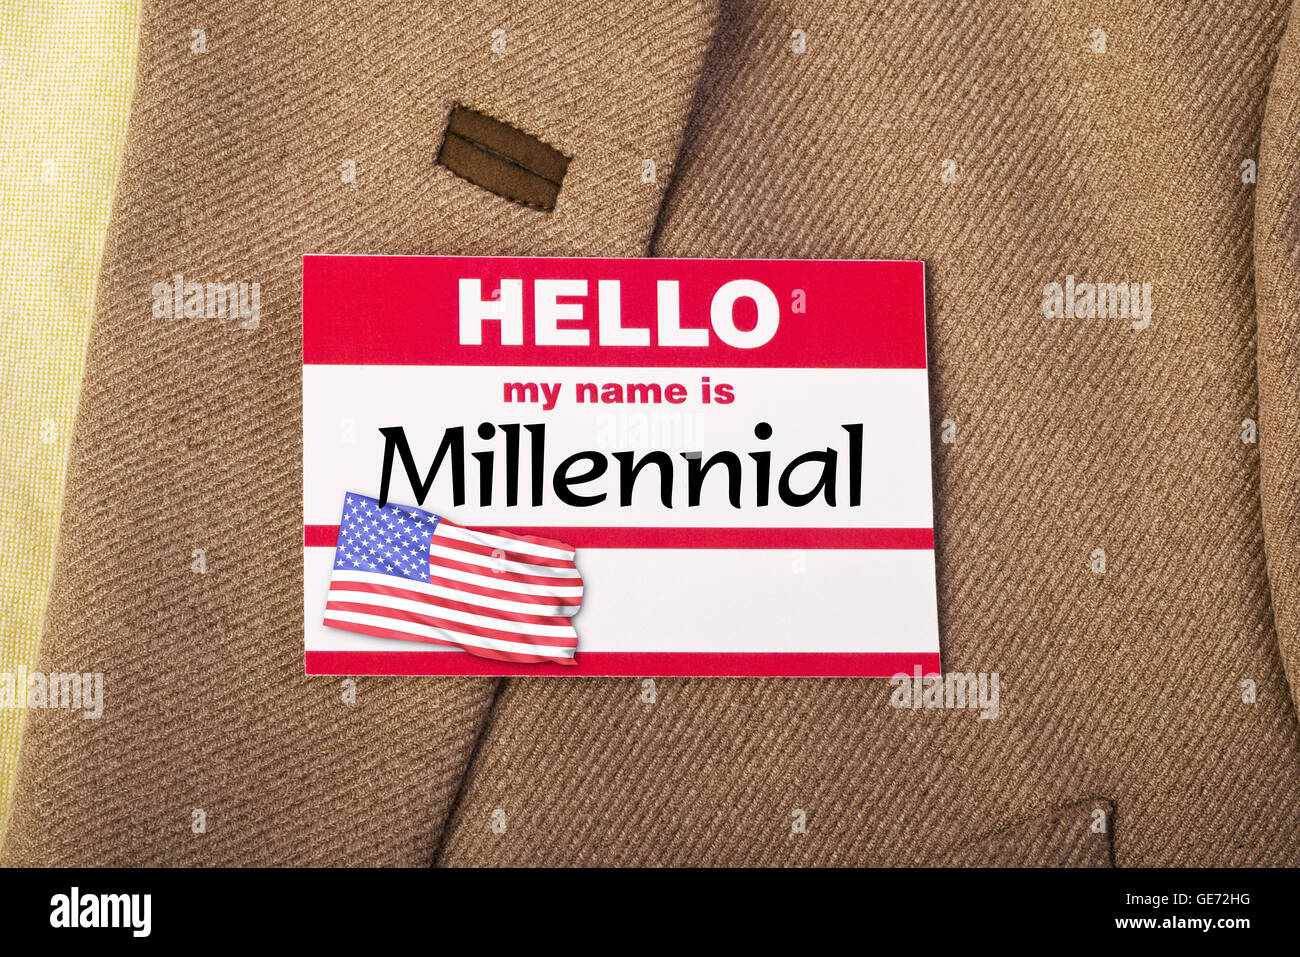 My name is Millennial. Stock Photo